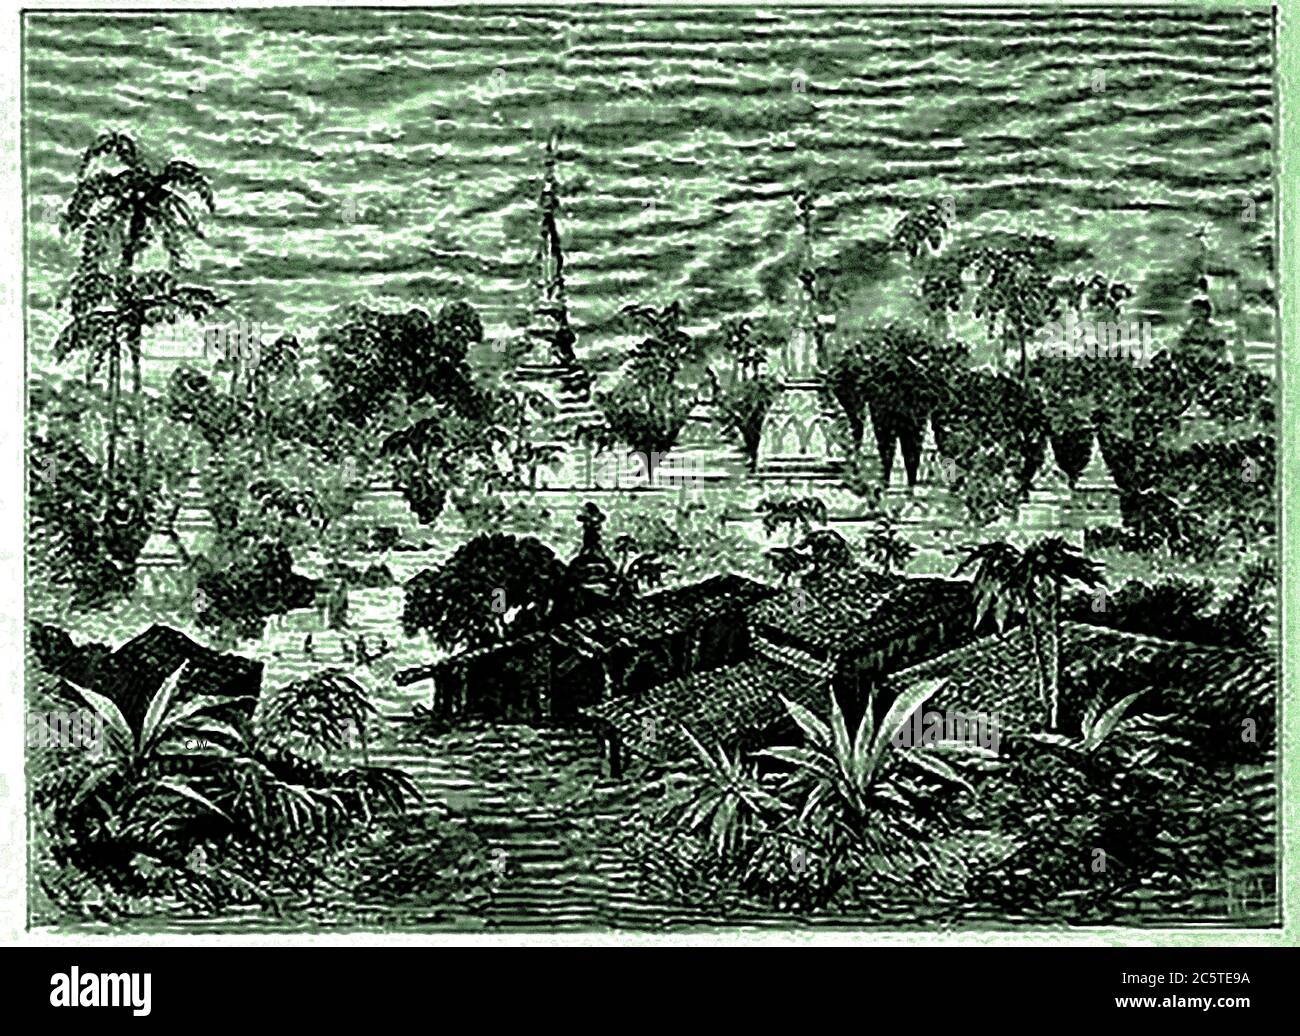 An 1880 illustration from the 'Illustrated Missionary News'. The magazine was formerly published under the title  The Pictorial missionary news edited by Henry Grattan Guinness (1835  - 1910) who was an Irish Protestant Christian preacher, evangelist and author (and others). This picture shows An 1880 view of pagodas in the then Pegu, Burma, (now Bago, Myanmar). Bago's earliest name was  Hanthawaddy. The city is the seaport capital of the Bago Region in Myanmar Stock Photo